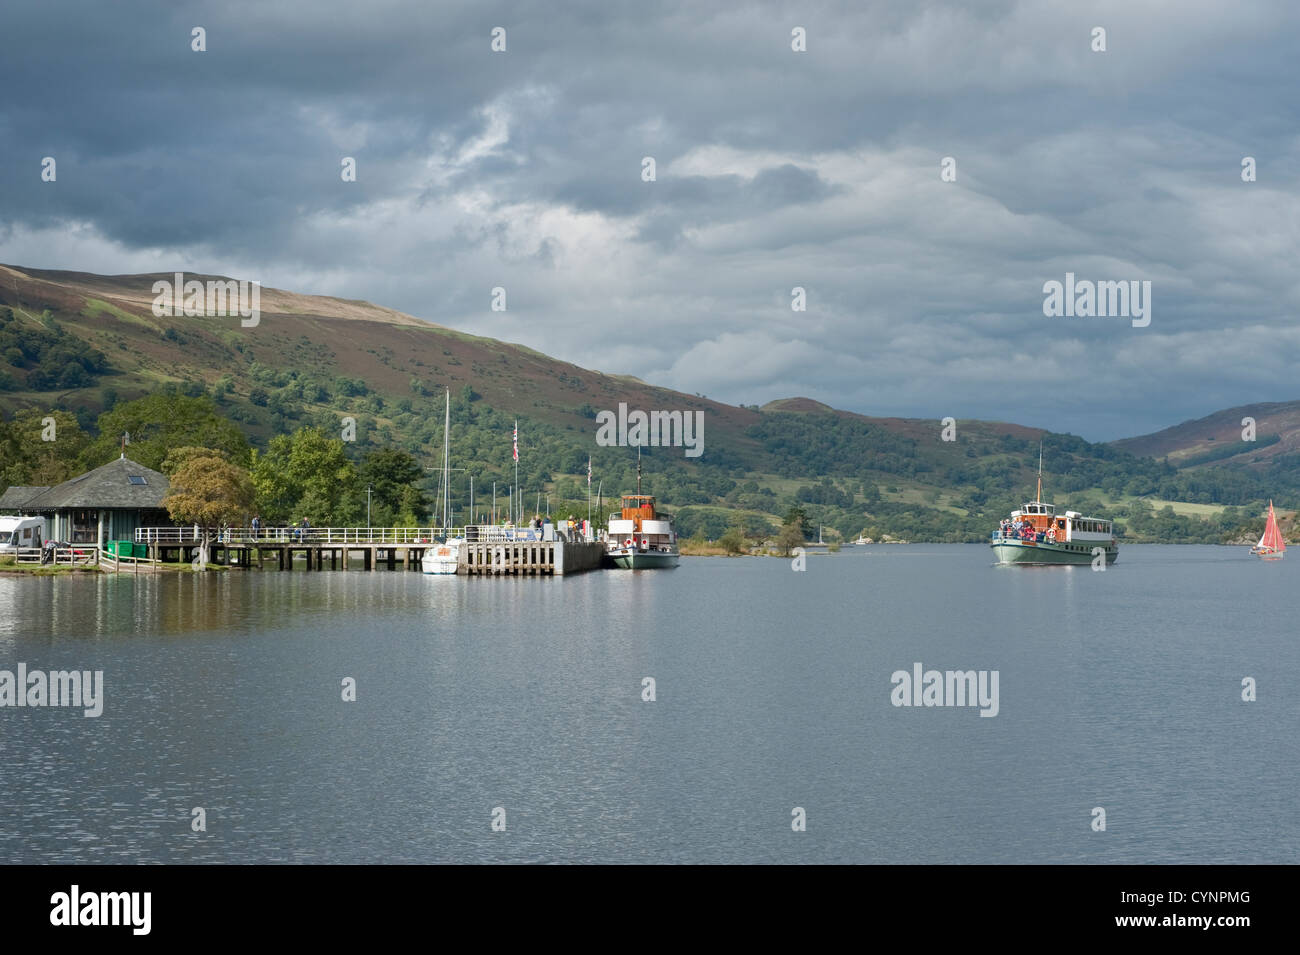 Passenger steam boat arriving at Glenridding pier on Lake Ullswater in the English Lake District Stock Photo